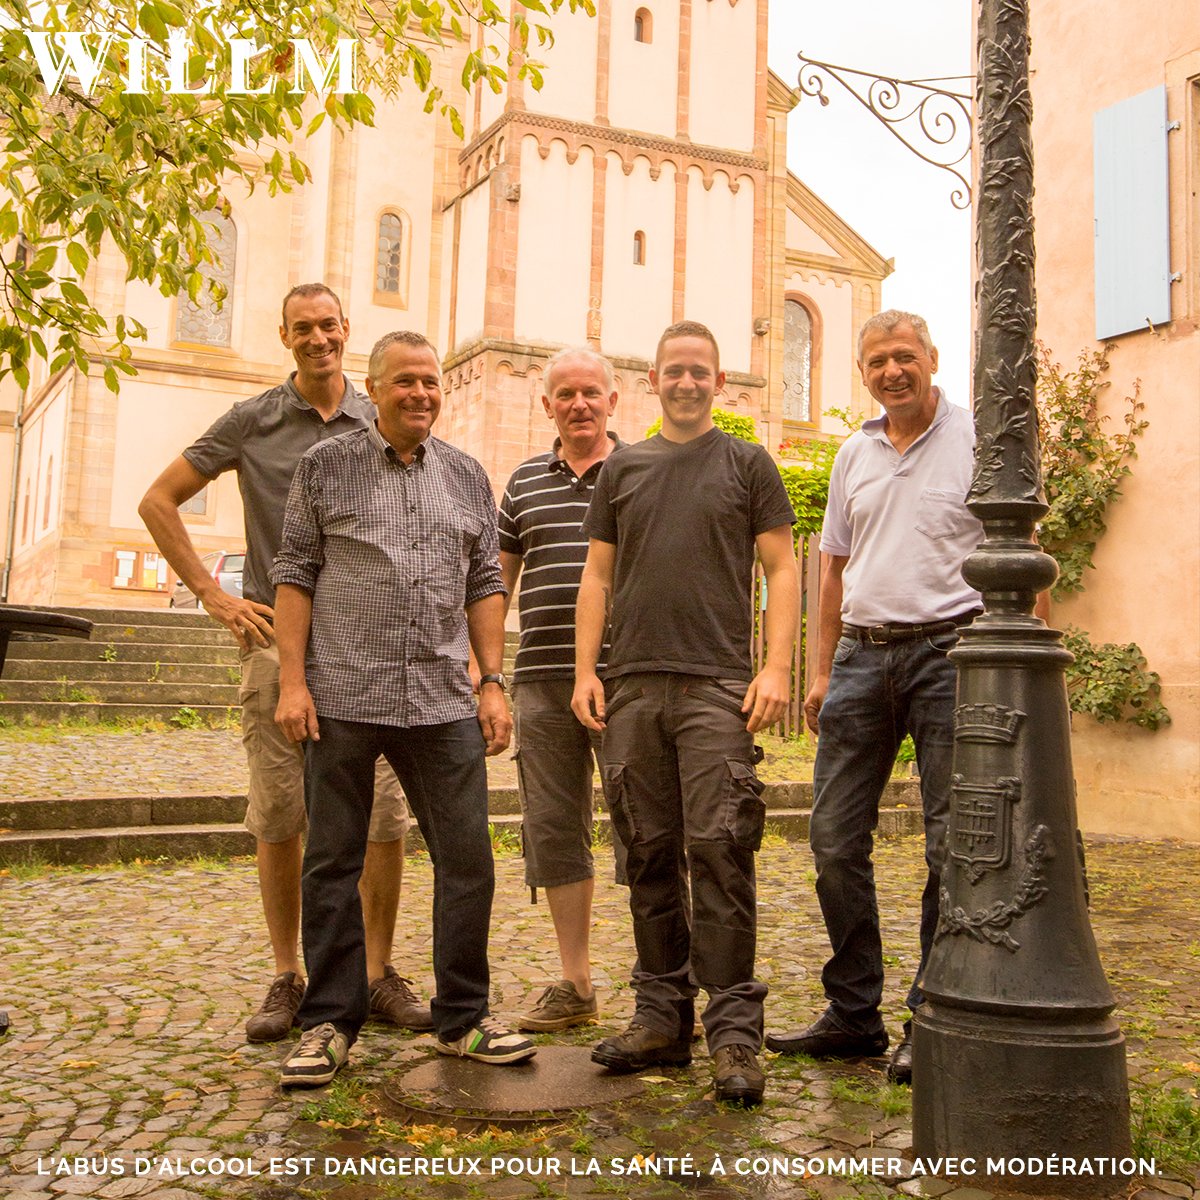 Respectful of their #heritage and winemaking #tradition, the 6 #winegrowers of Maison Willm work hand in hand to ensure only the best grapes are destined for our wines. #drinkalsace #alsacerocks #alsacewillm #alsacewines #wines